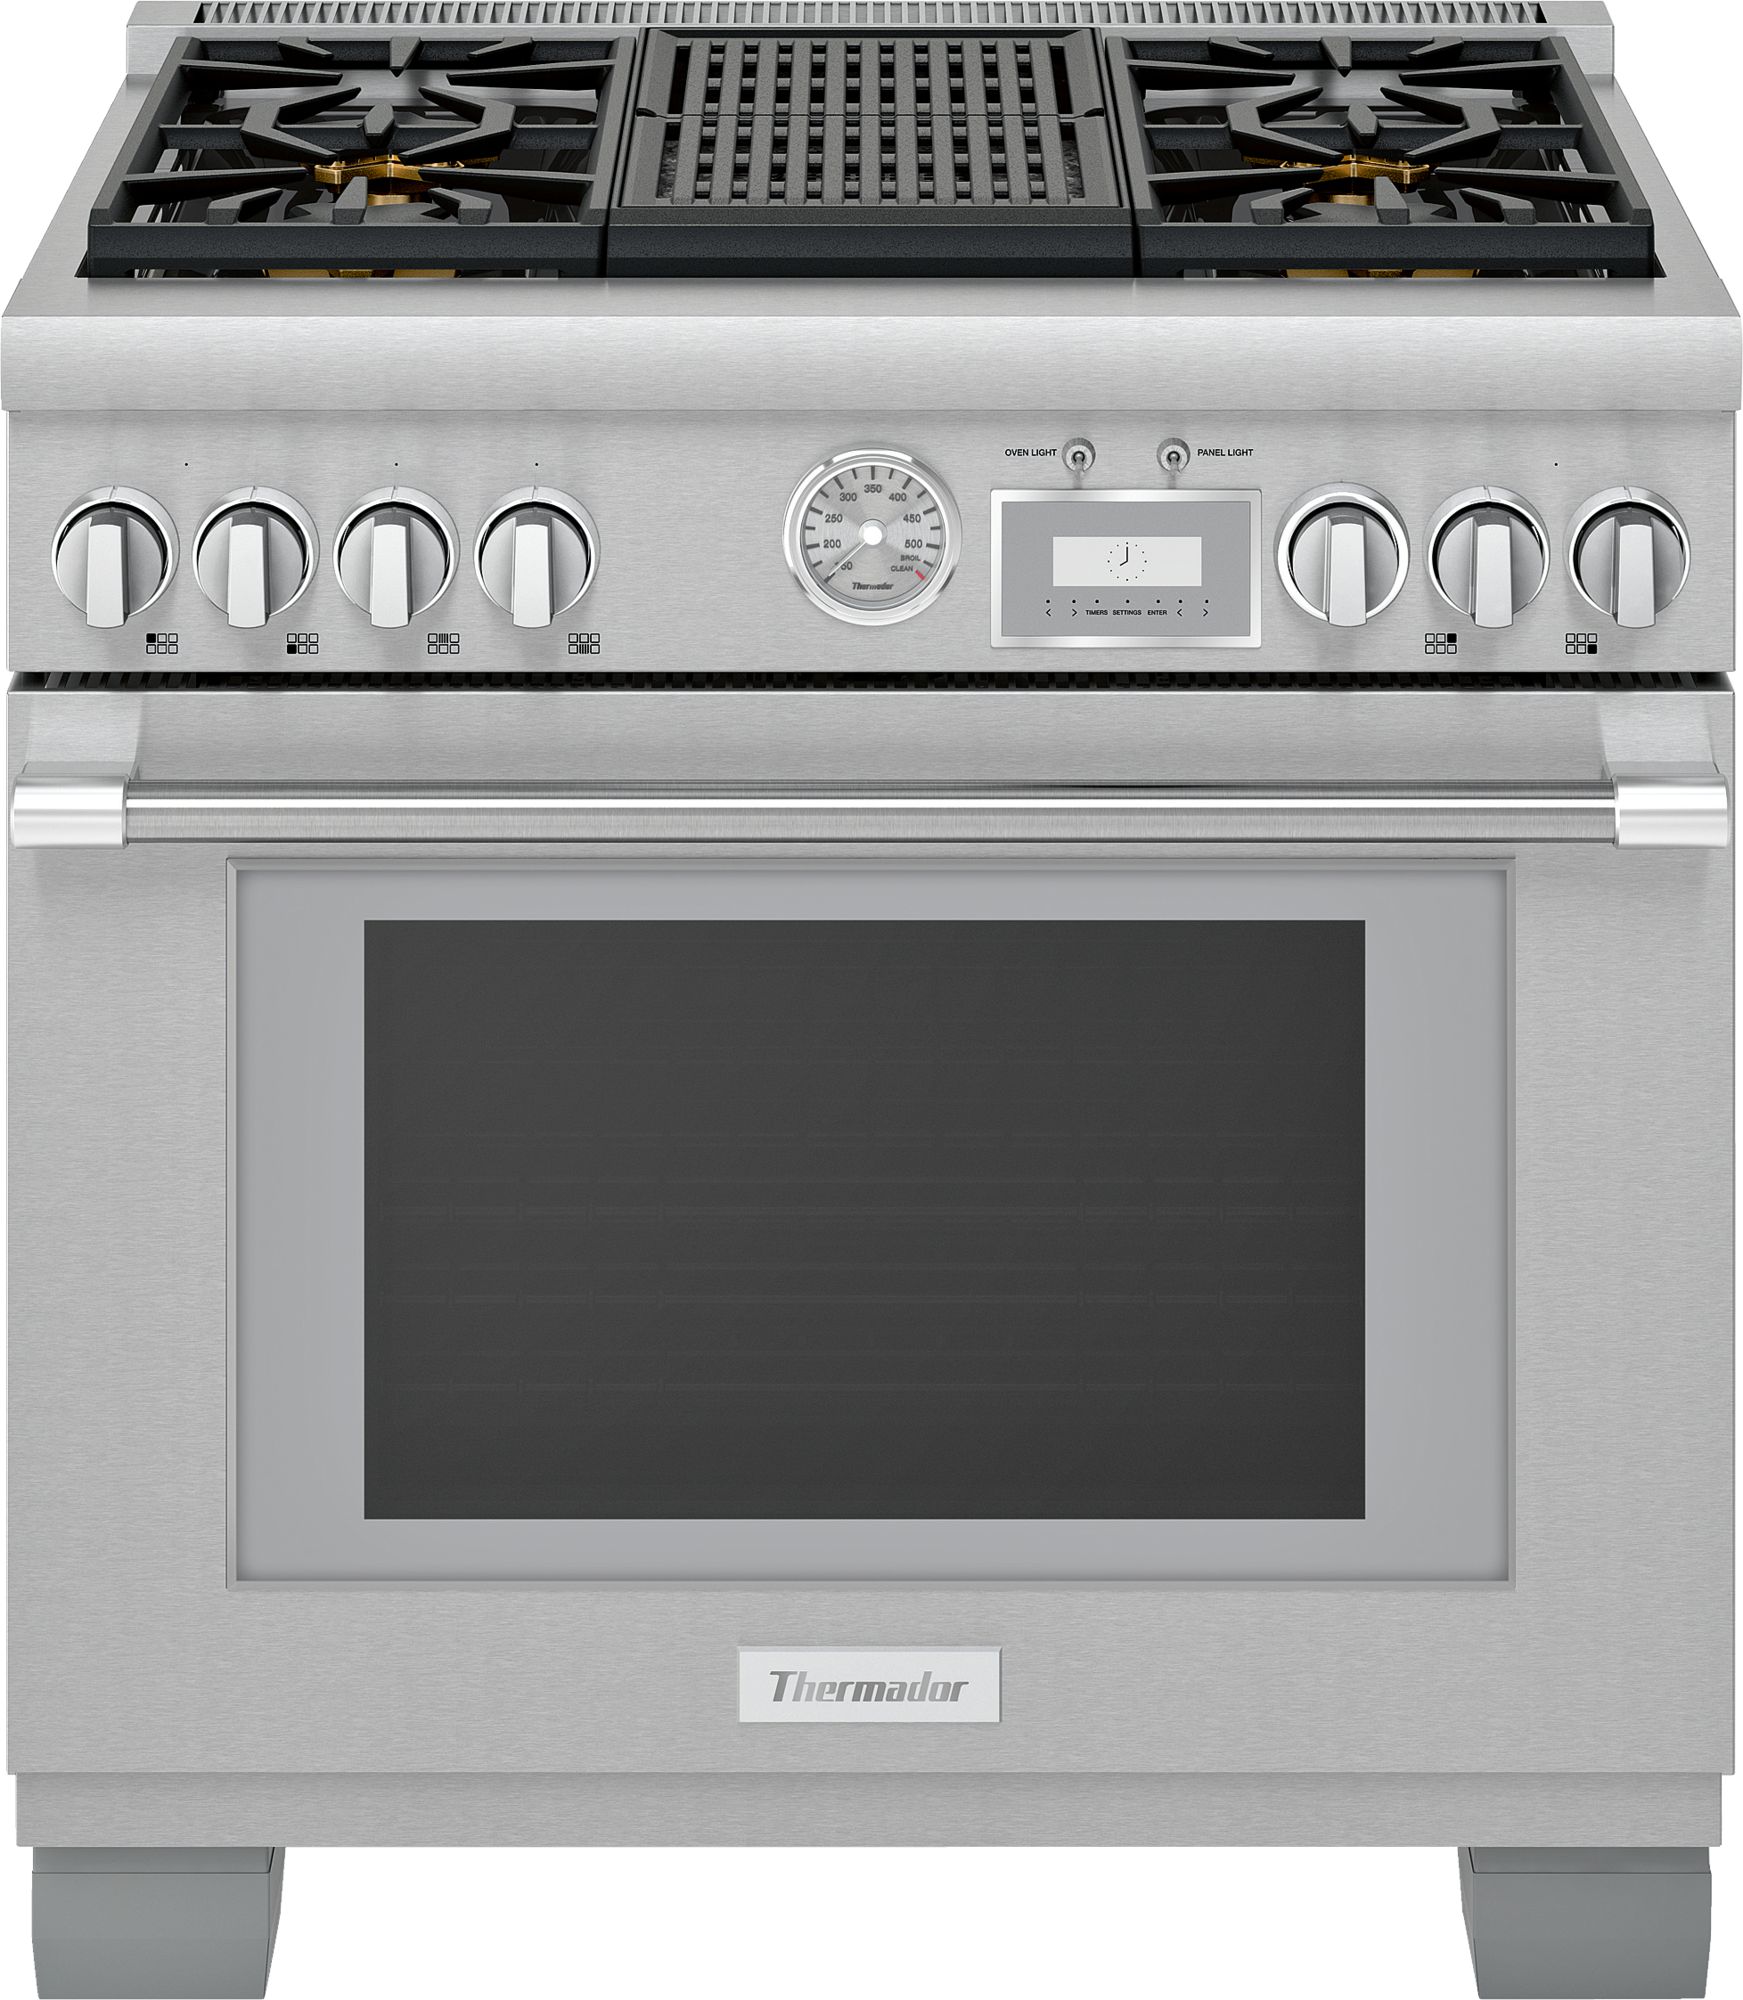 Stock photo of a stainless steel Thermador brand range with large handle and metal griddle in the middle. 